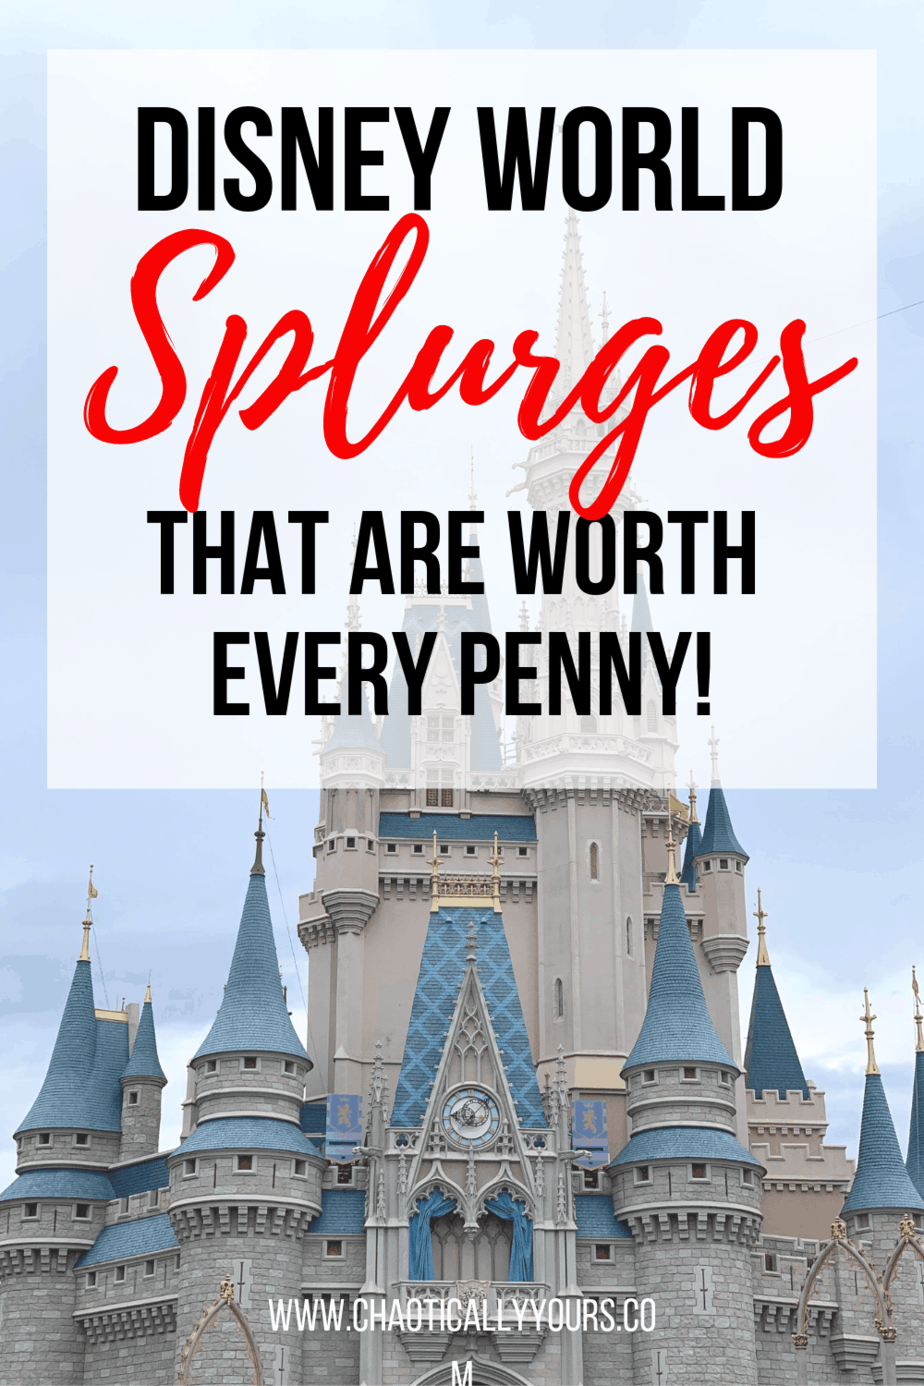 Disney World Splurges That Are Worth Every Penny!